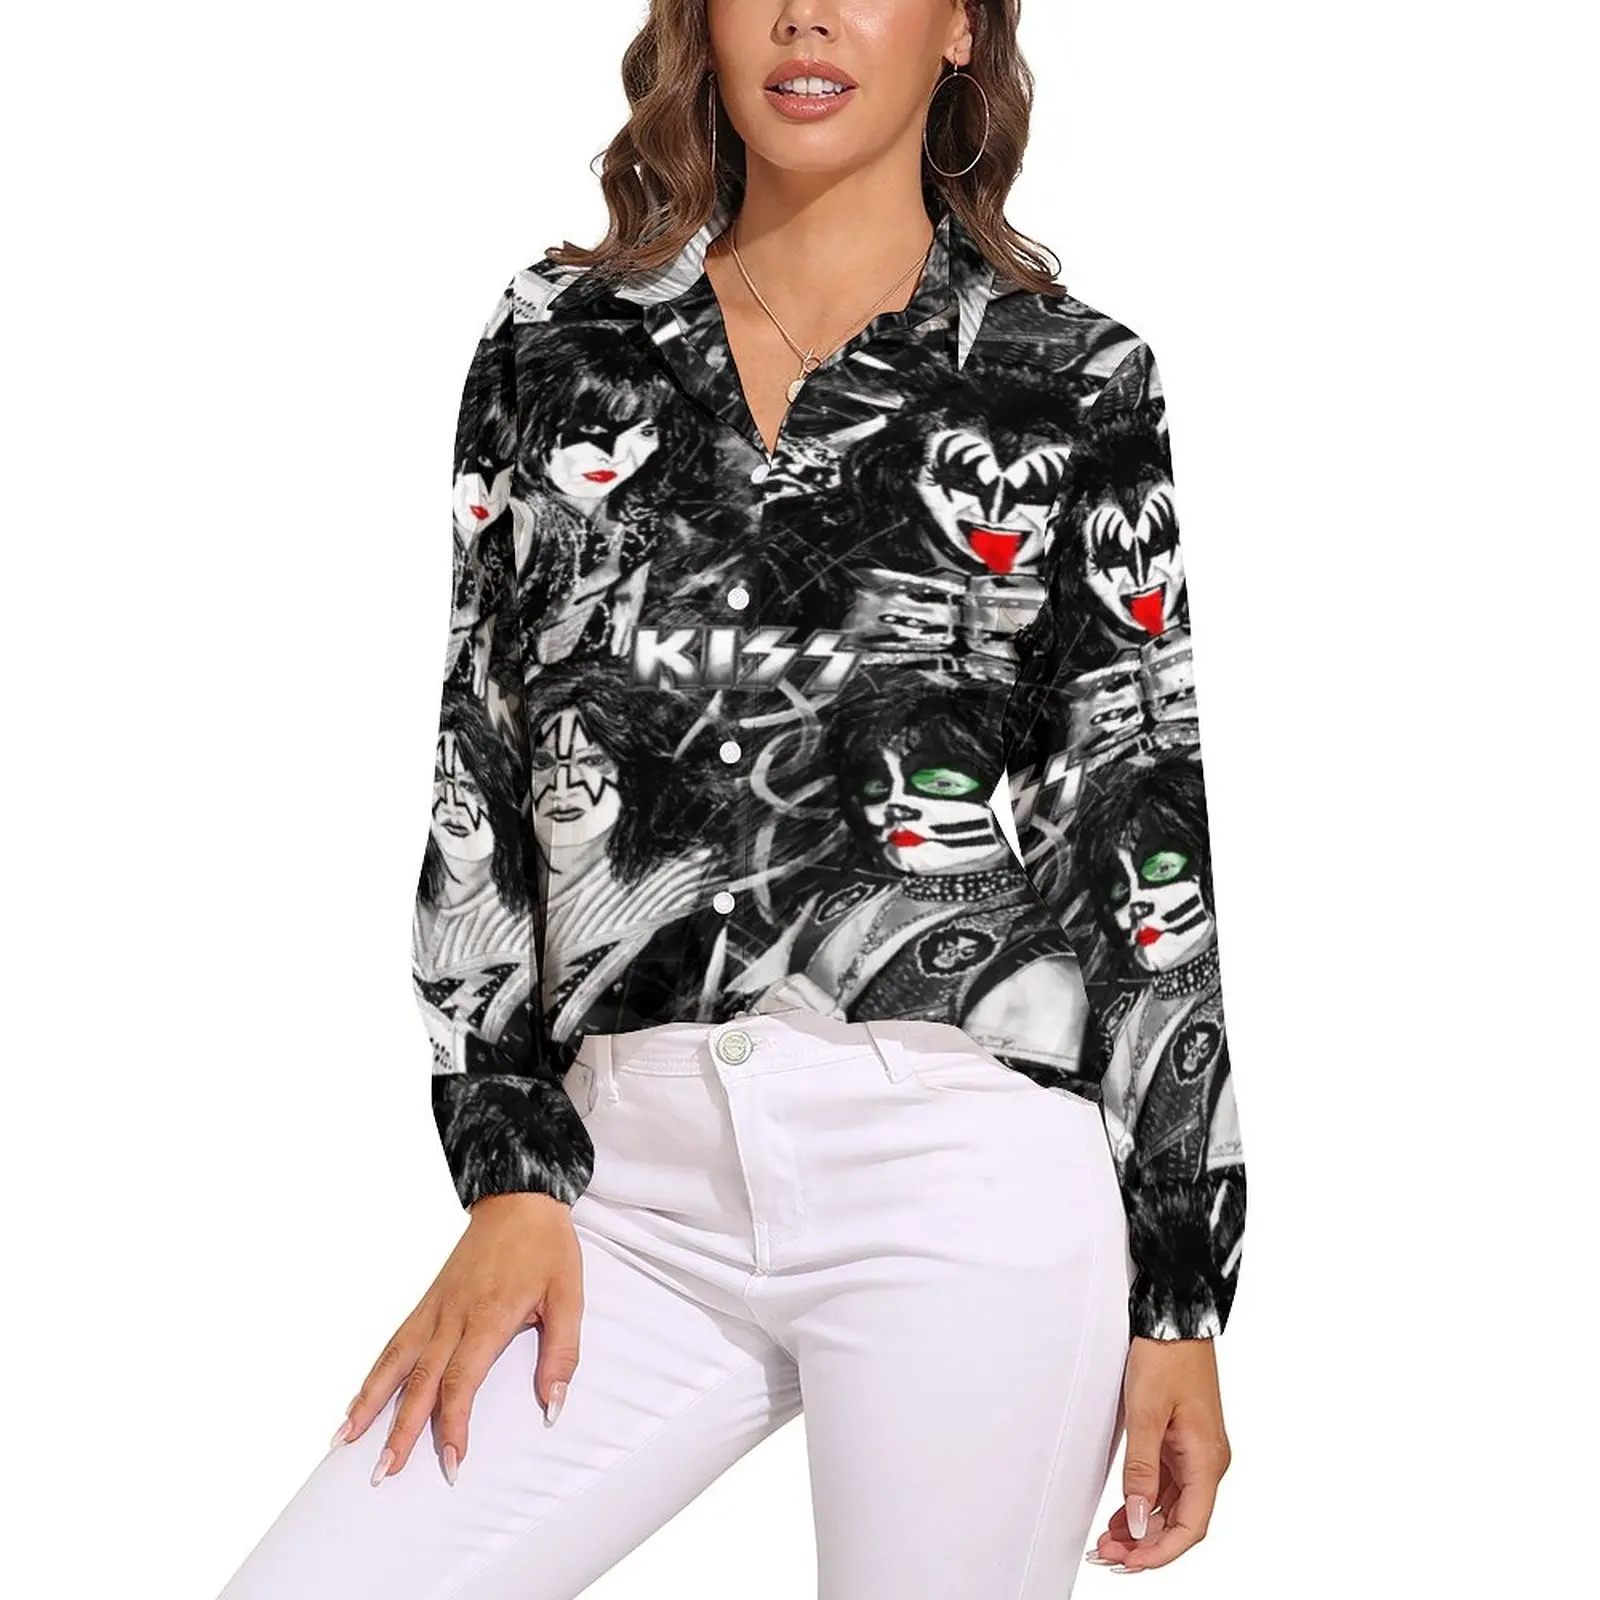 Kiss Band Print Blouse Woman Colour Splash with Logo Street Wear Loose Blouses Long-Sleeve Cool Shirts Casual Top Big Size 3XL